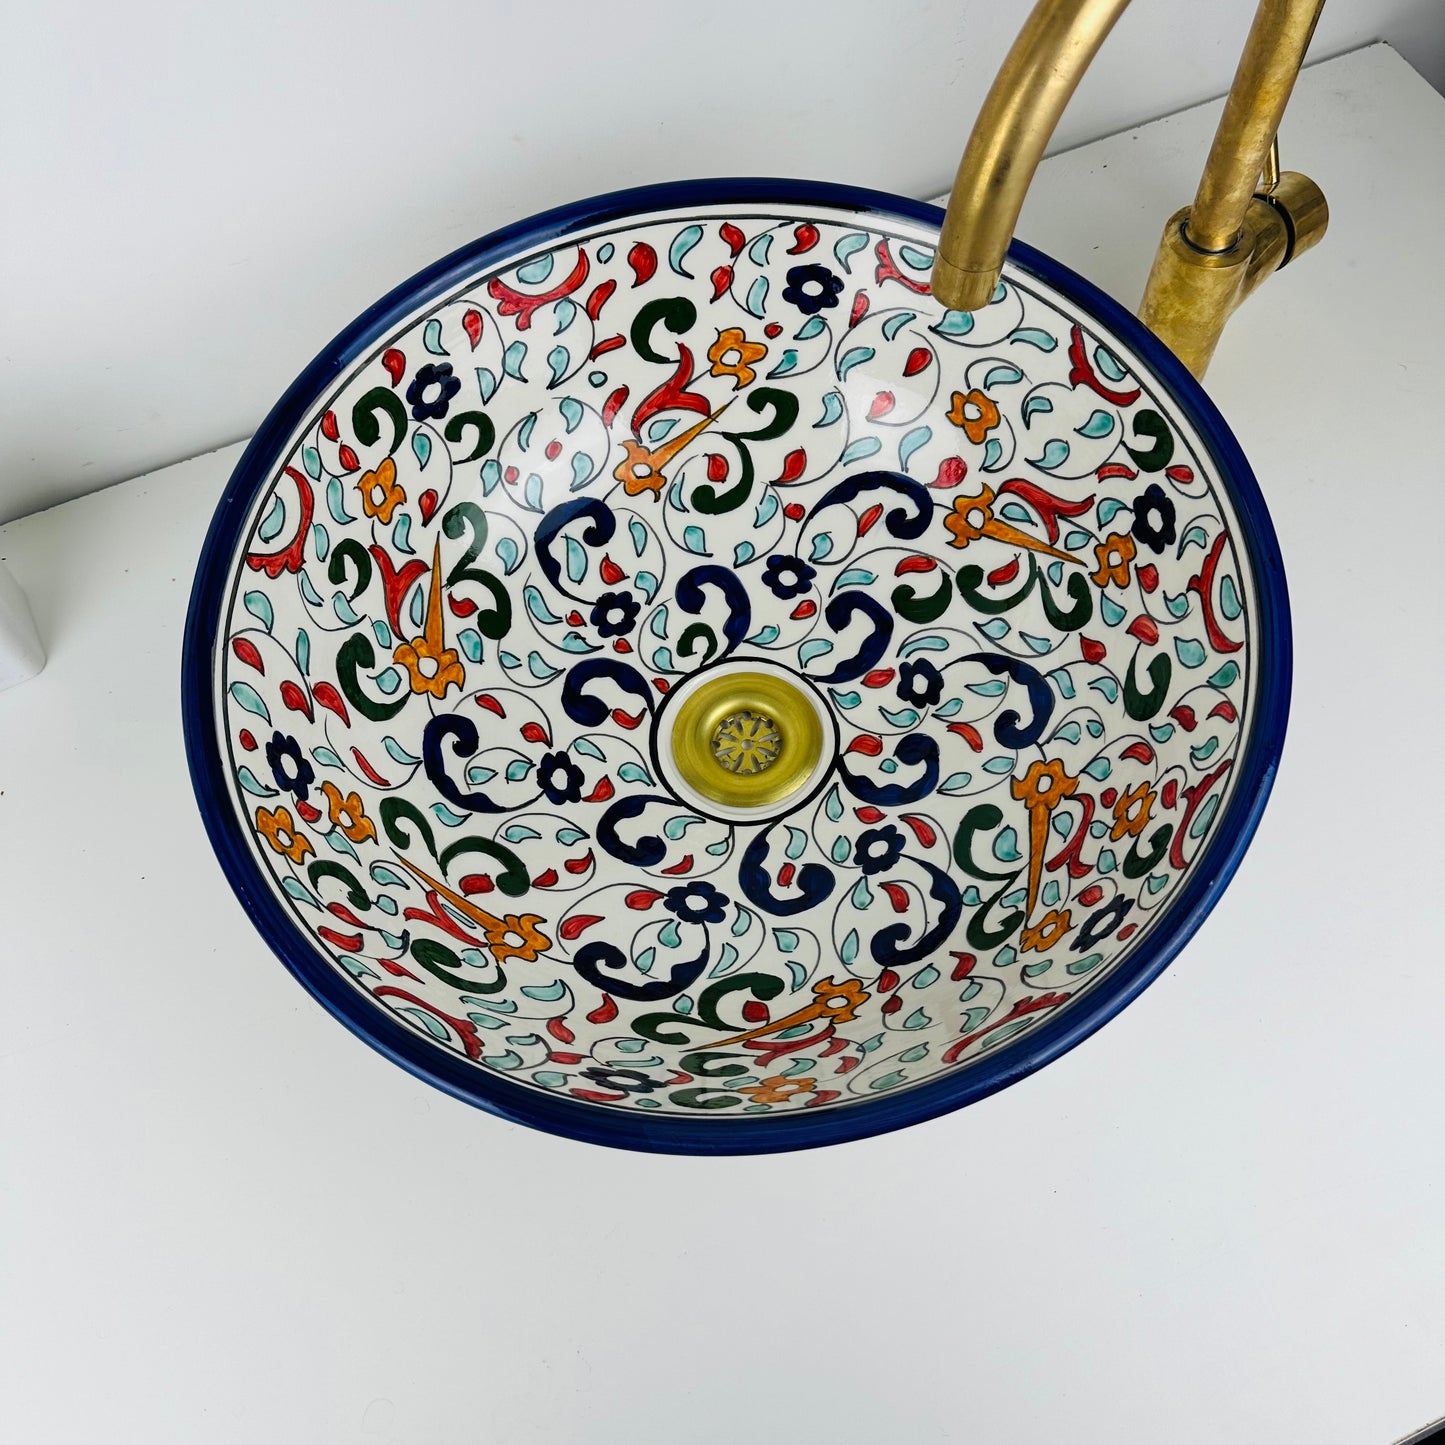 Colorful Artisanal Touch: Handcrafted Ceramic Sink with Unique Design